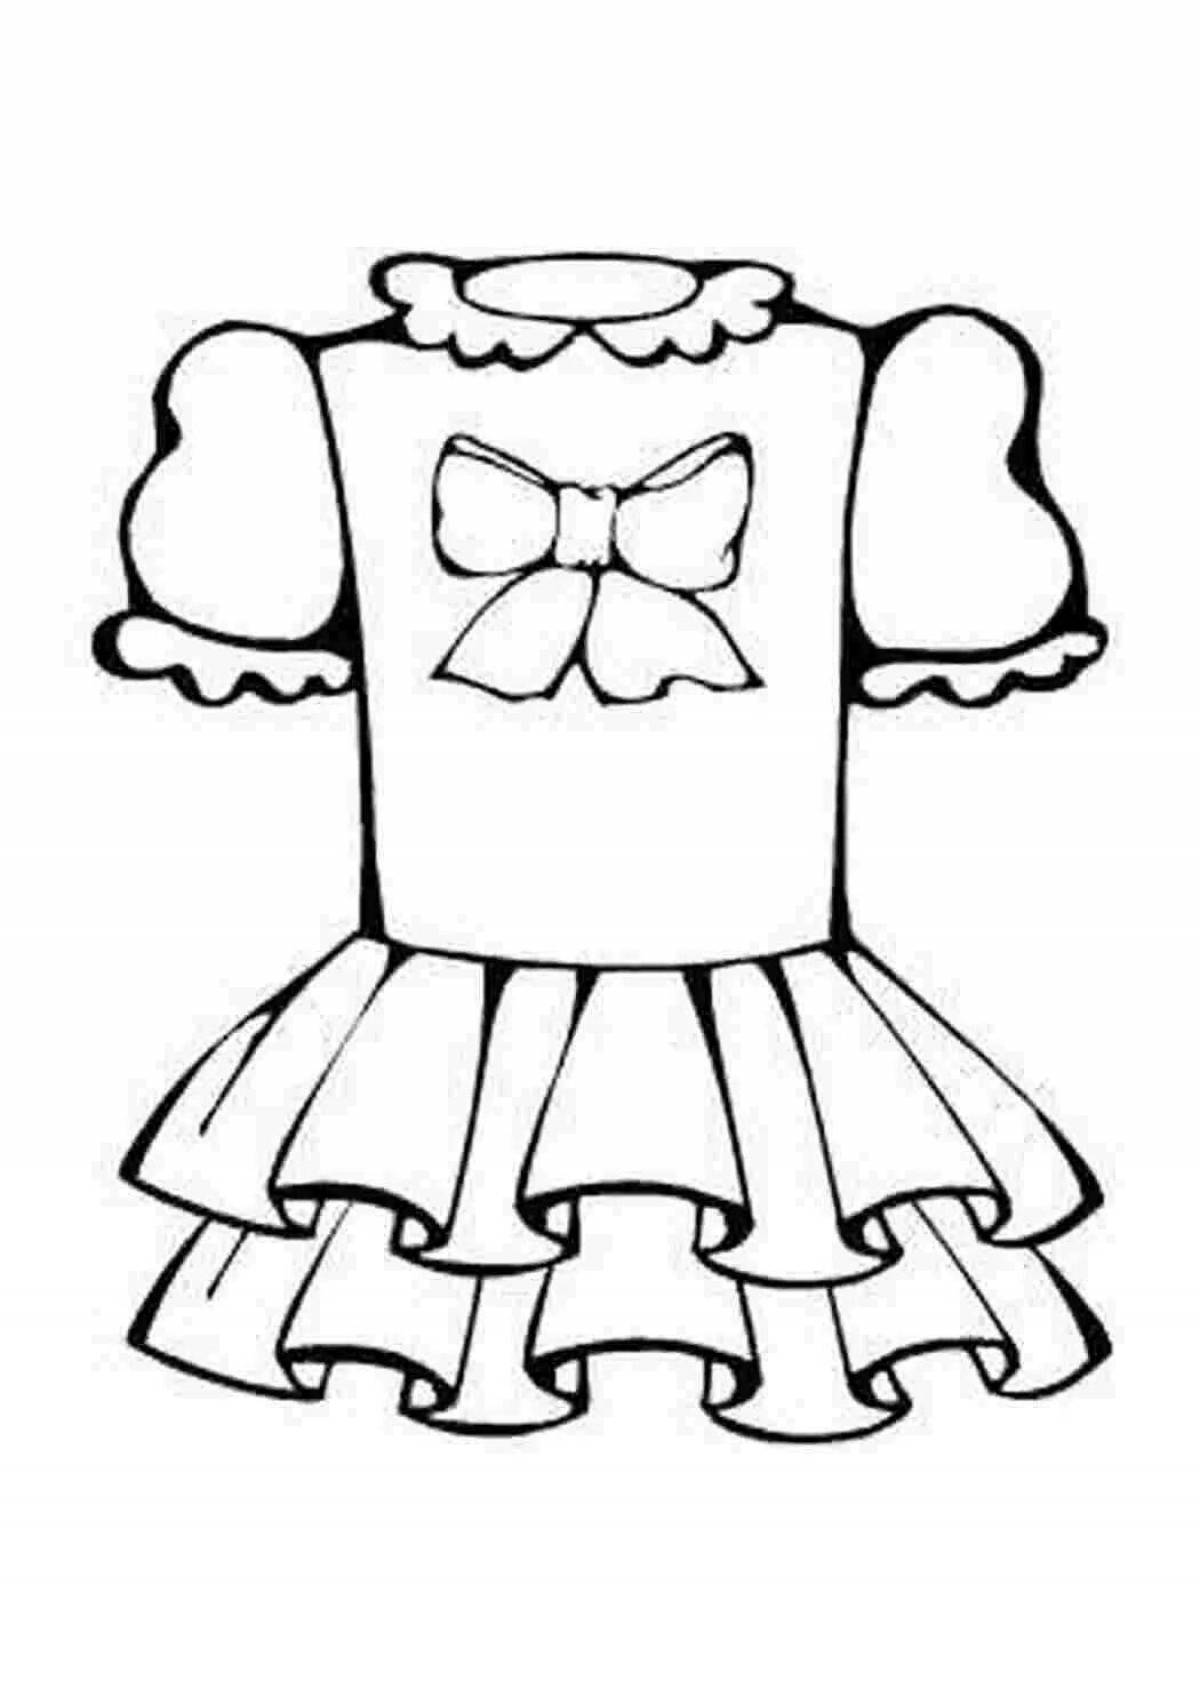 Glitter doll dress coloring book for 4-5 year olds